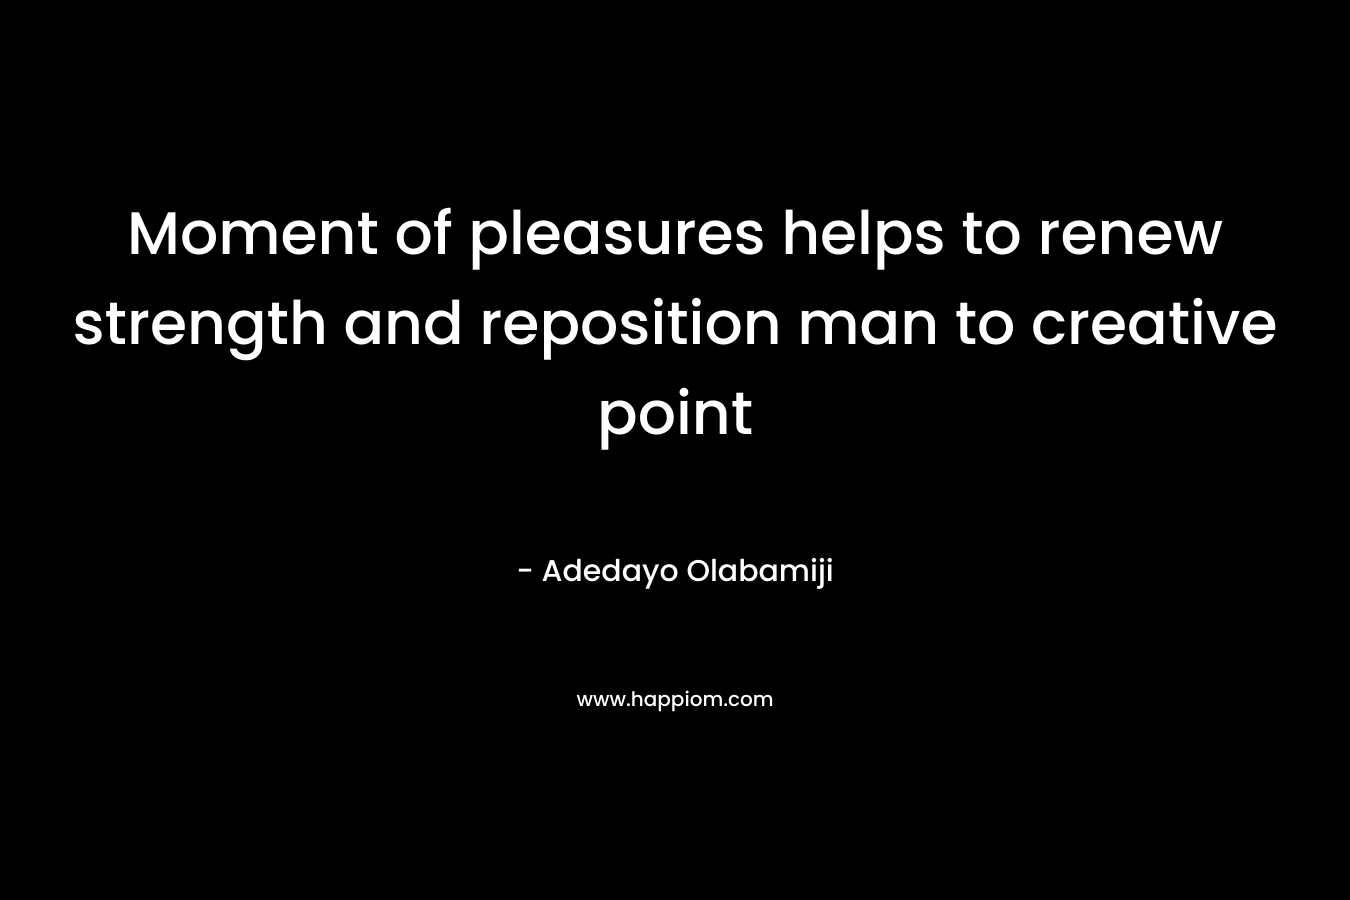 Moment of pleasures helps to renew strength and reposition man to creative point – Adedayo Olabamiji